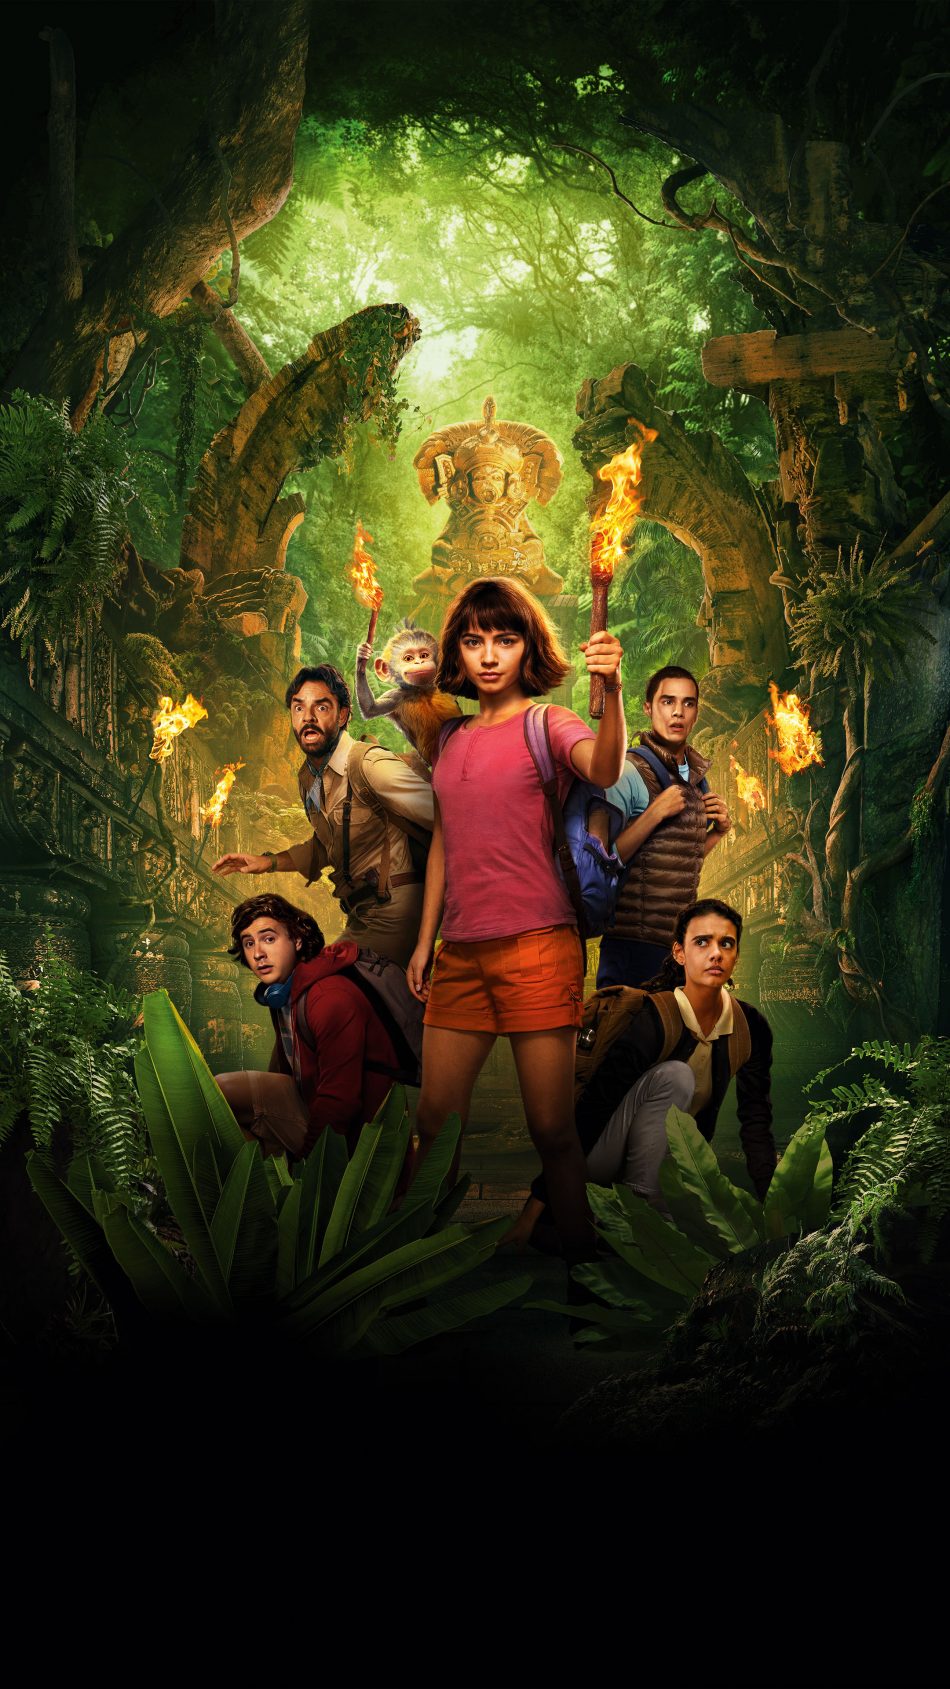 Dora And The Lost City of Gold 2019 Adventure 4K Ultra HD Mobile Wallpaper